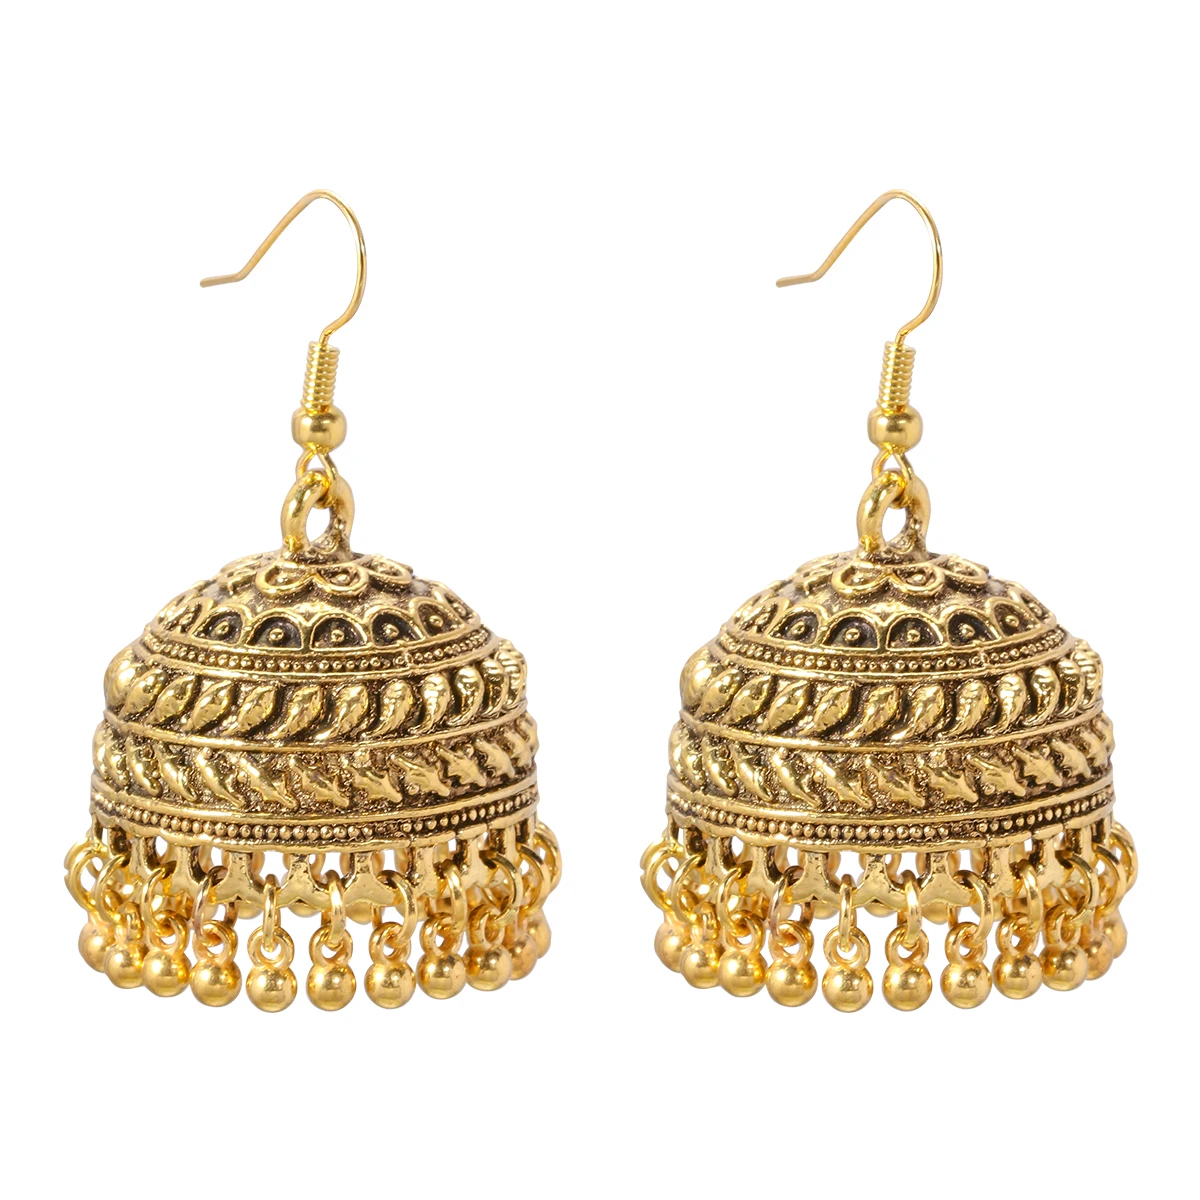 

Vintage Ethnic Style Charms Earrings For Women Statement Metal Gold Color Bell Carved Gypsy Jhumka Earrings Indian Jewelry